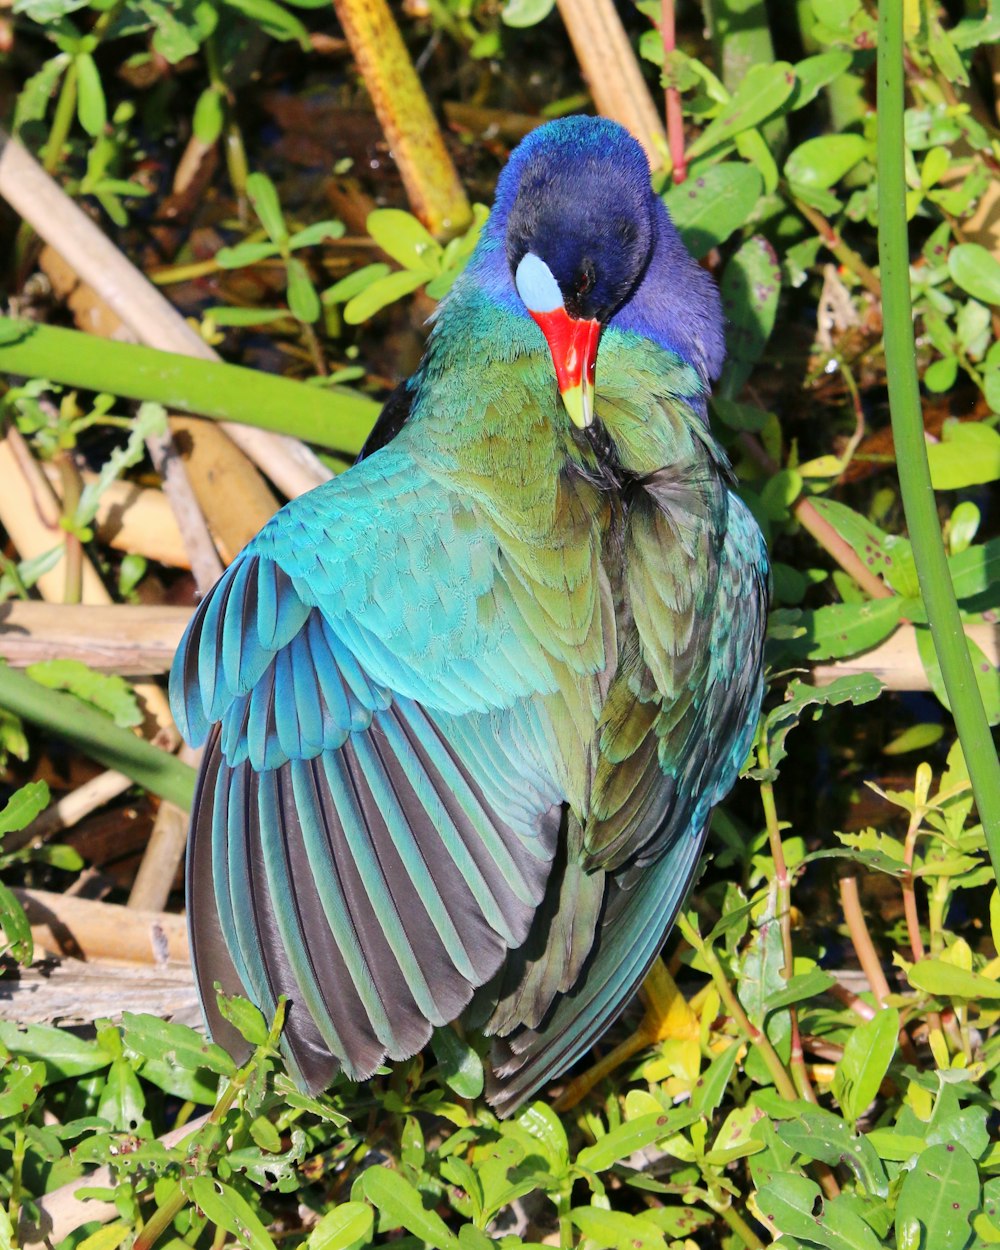 a blue and green bird sitting in the grass